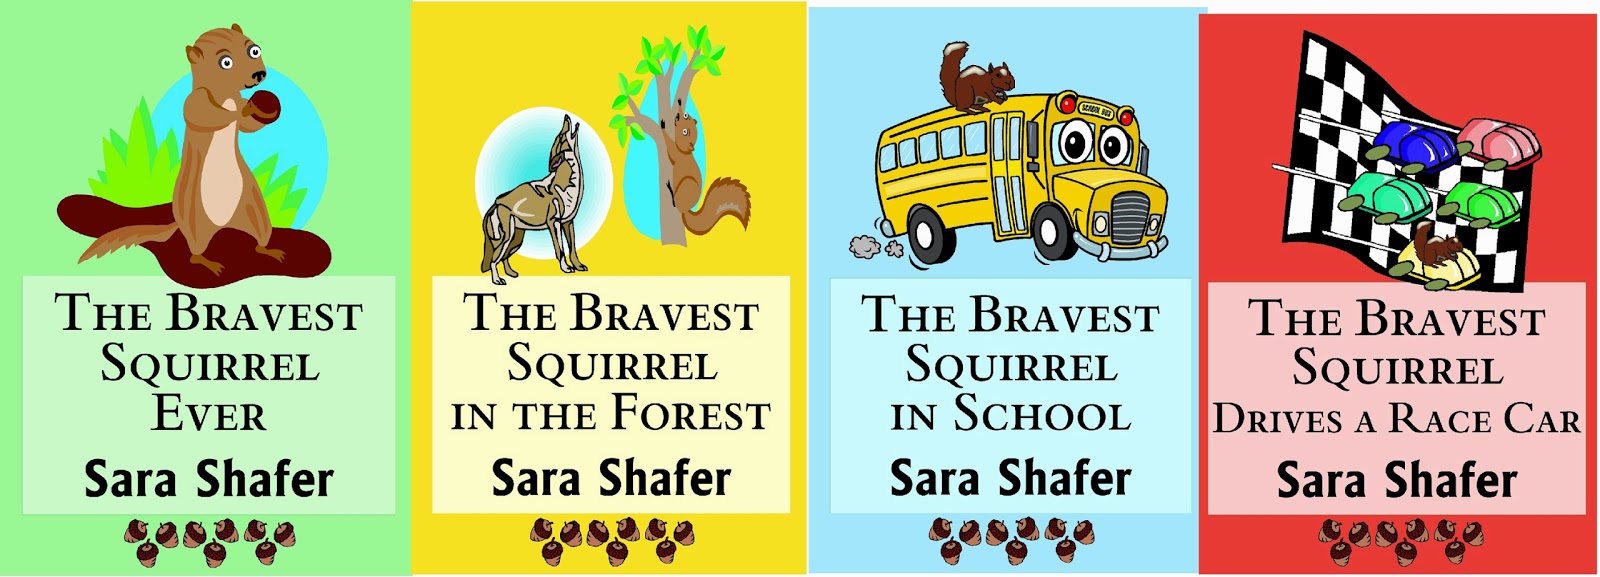 The Bravest Squirrel Series Website Welcome